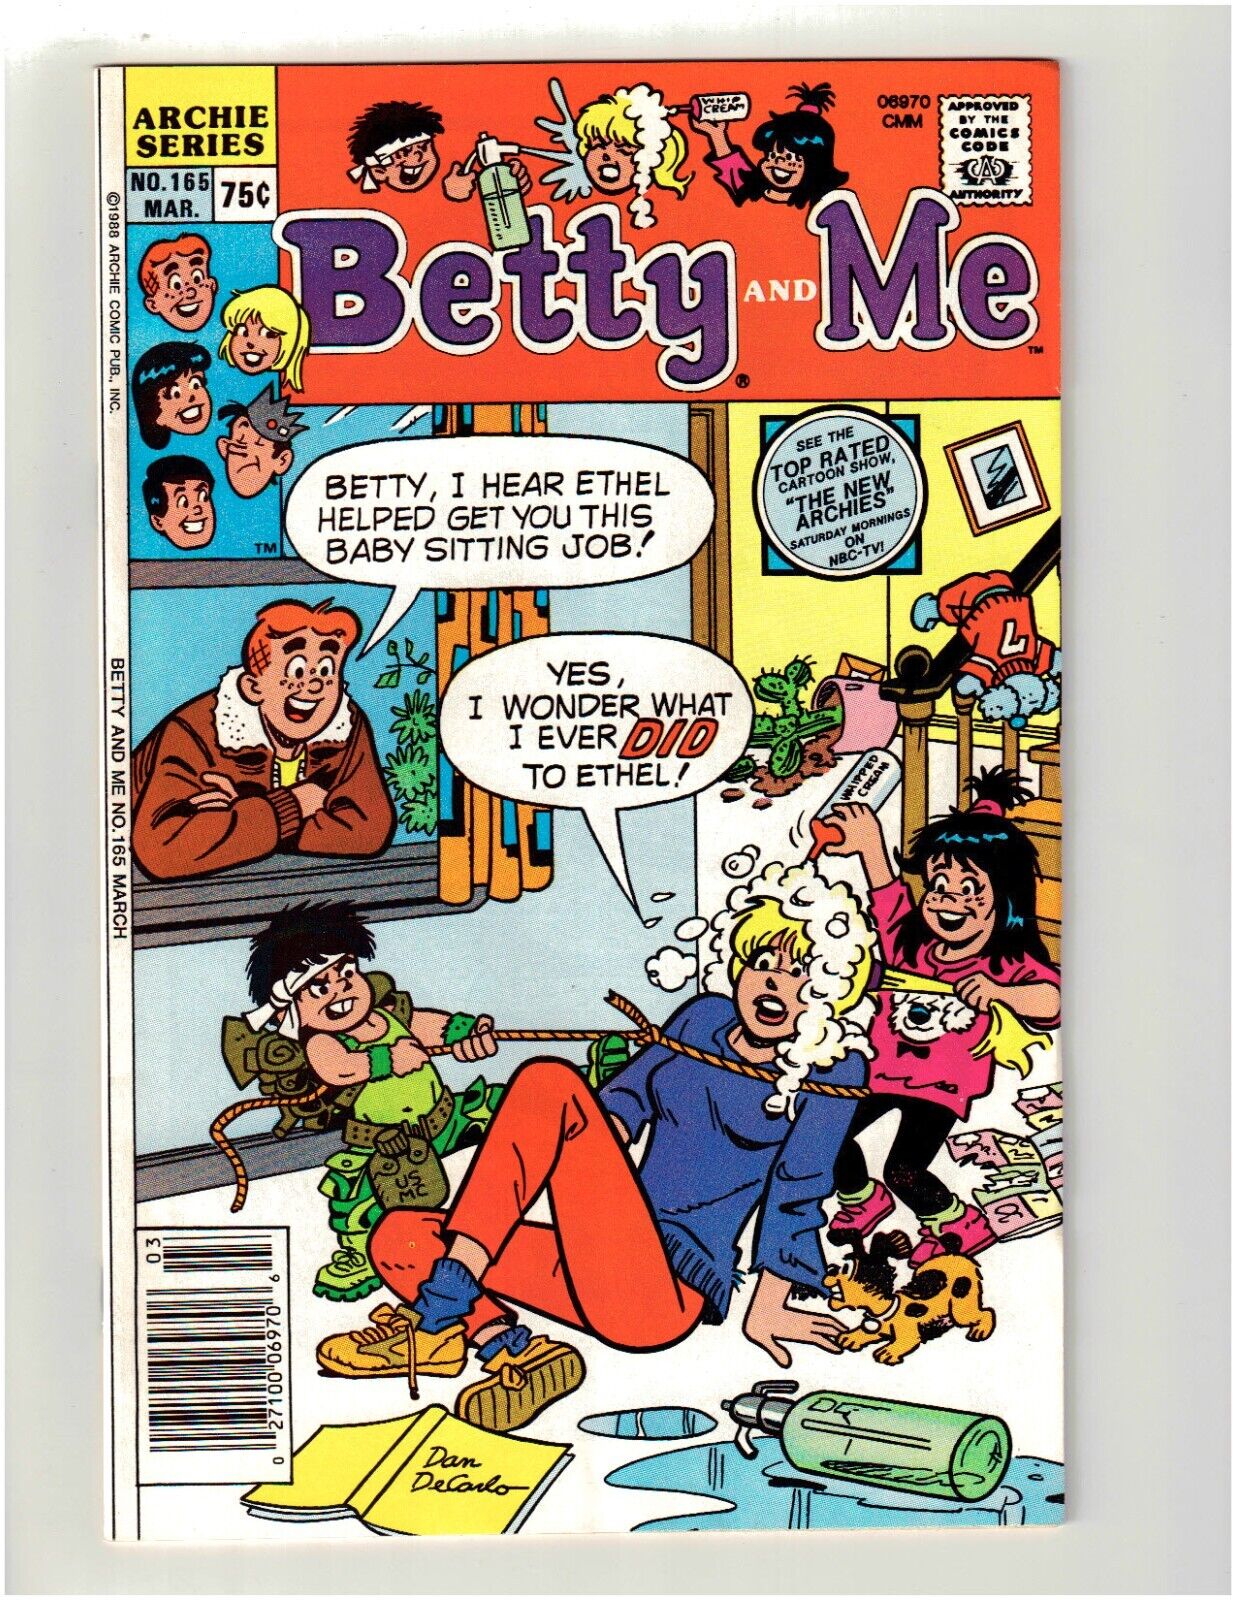 Archies Series - BETTY AND ME (1988 Series)- March #165 Comics Book